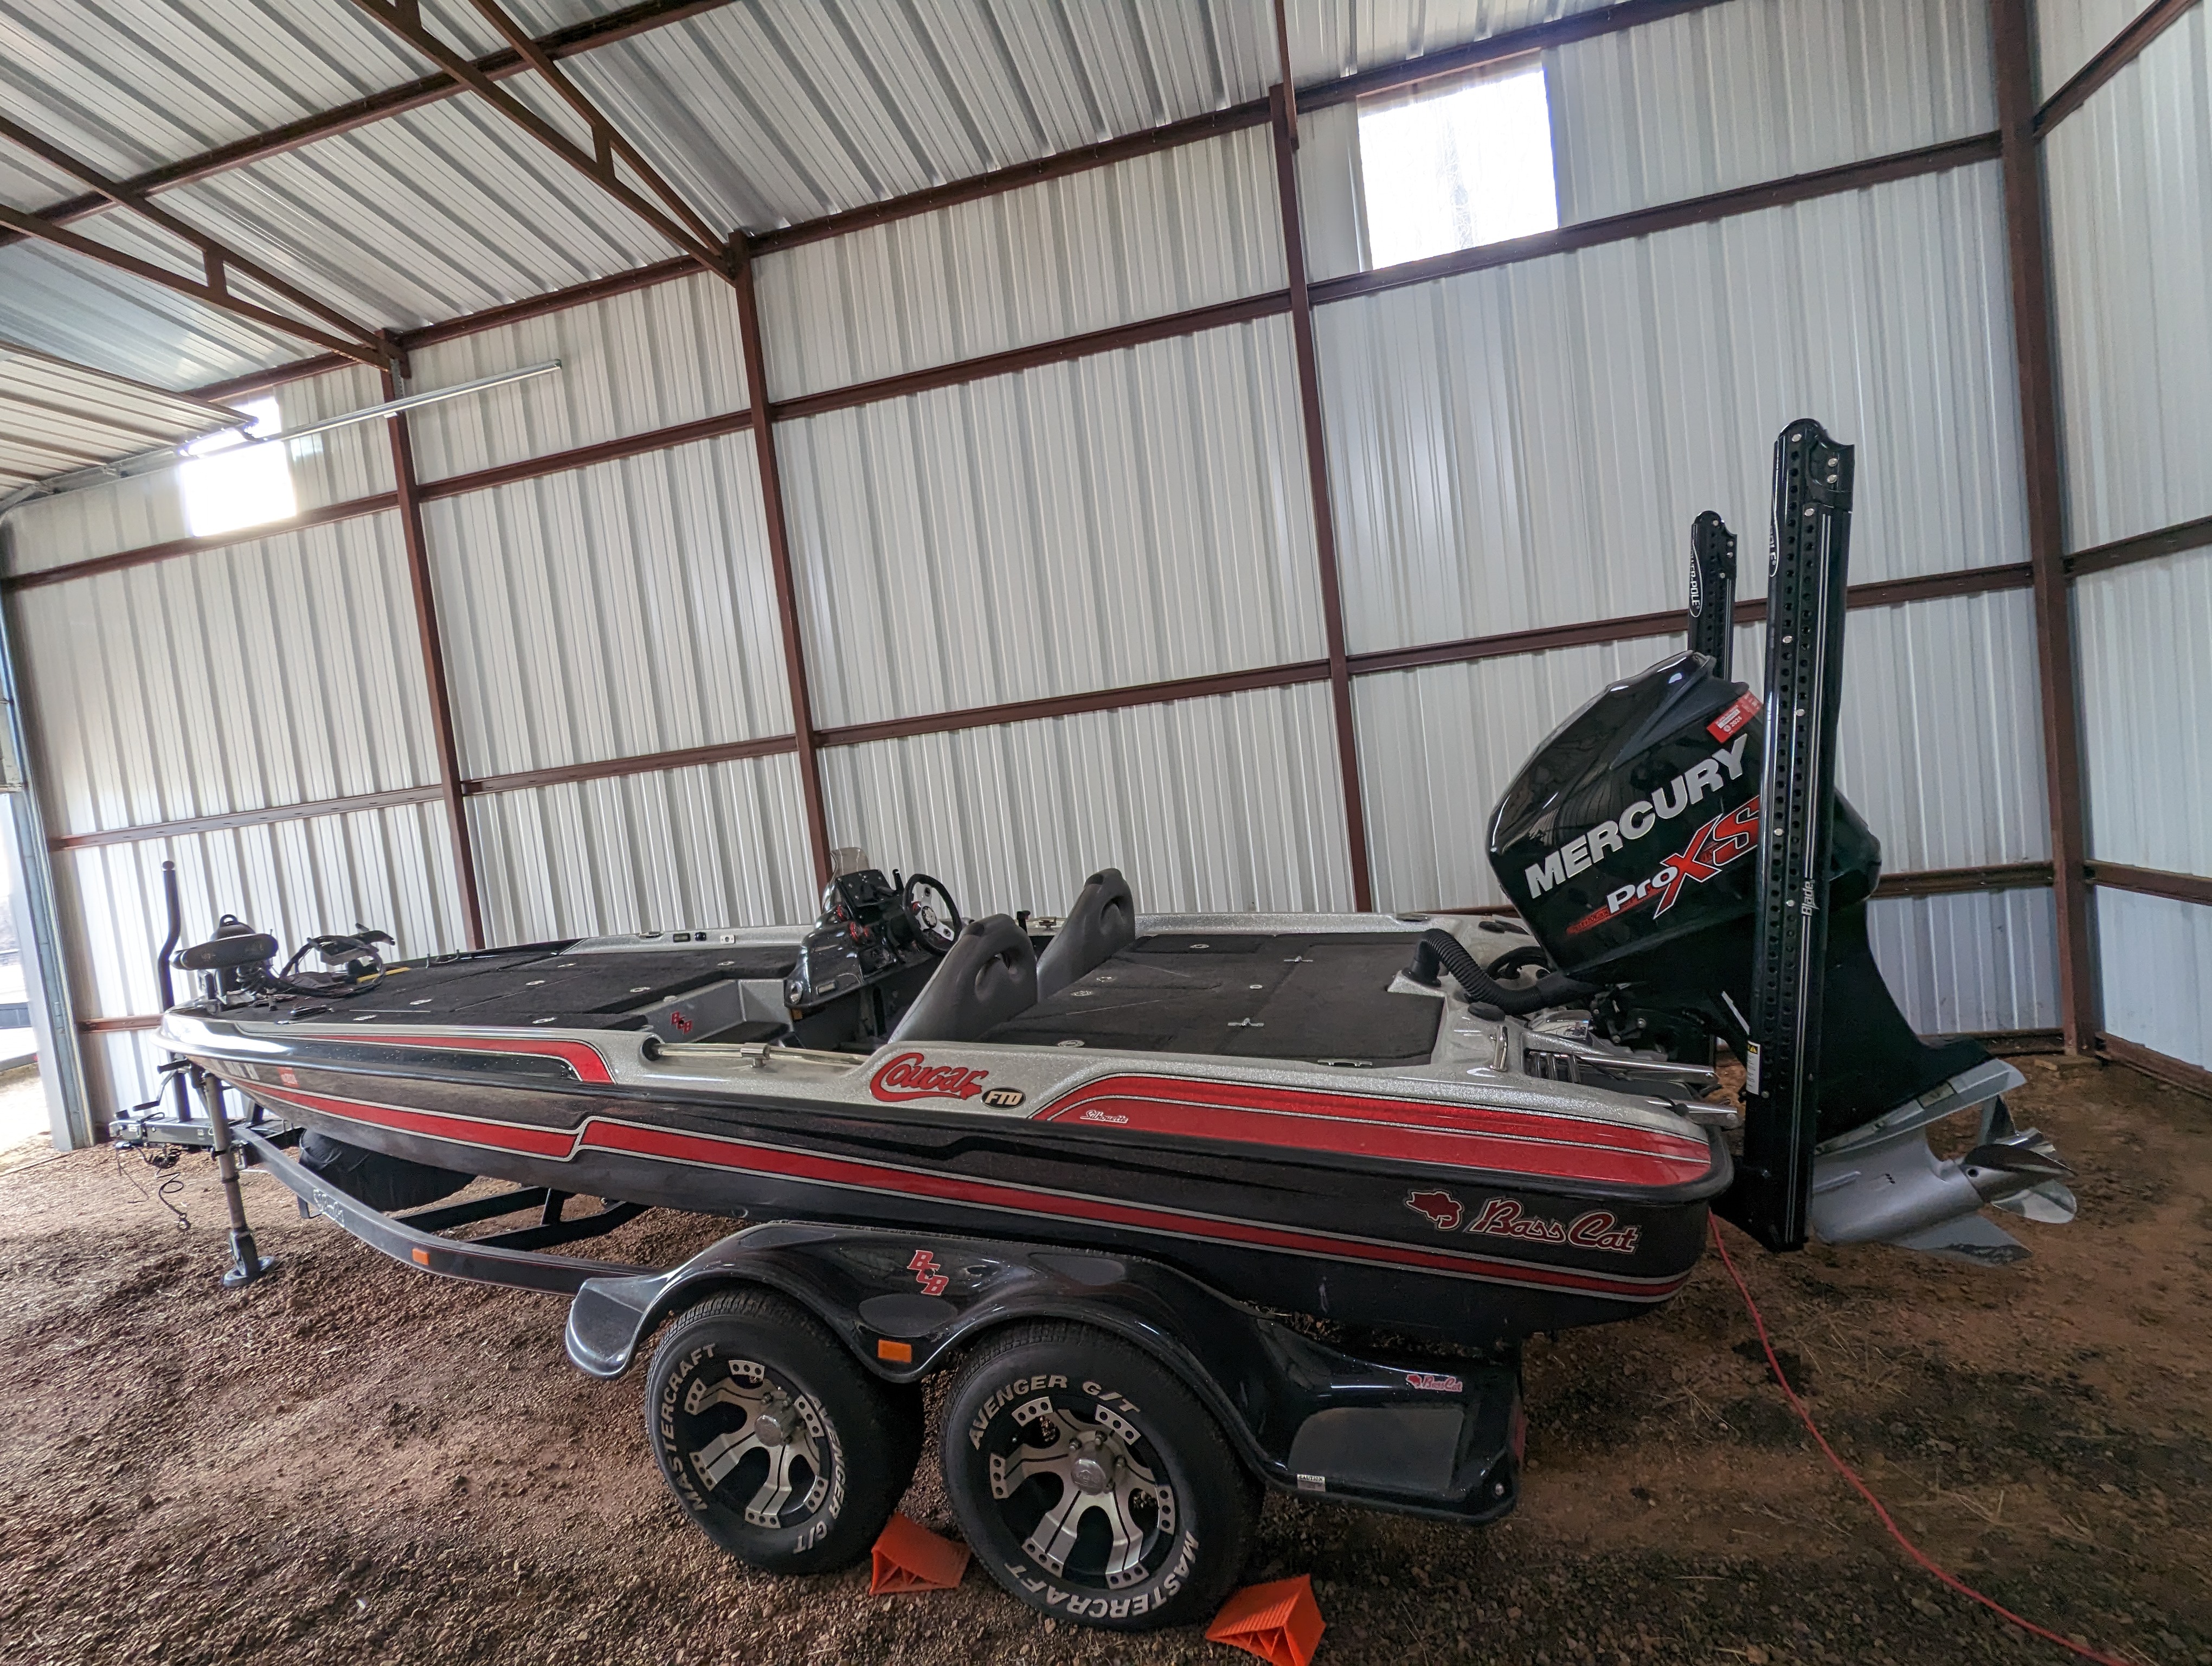 2015 20 foot Bass Cat Cougar FTD Fishing boat for sale in Tuttle, OK - image 1 